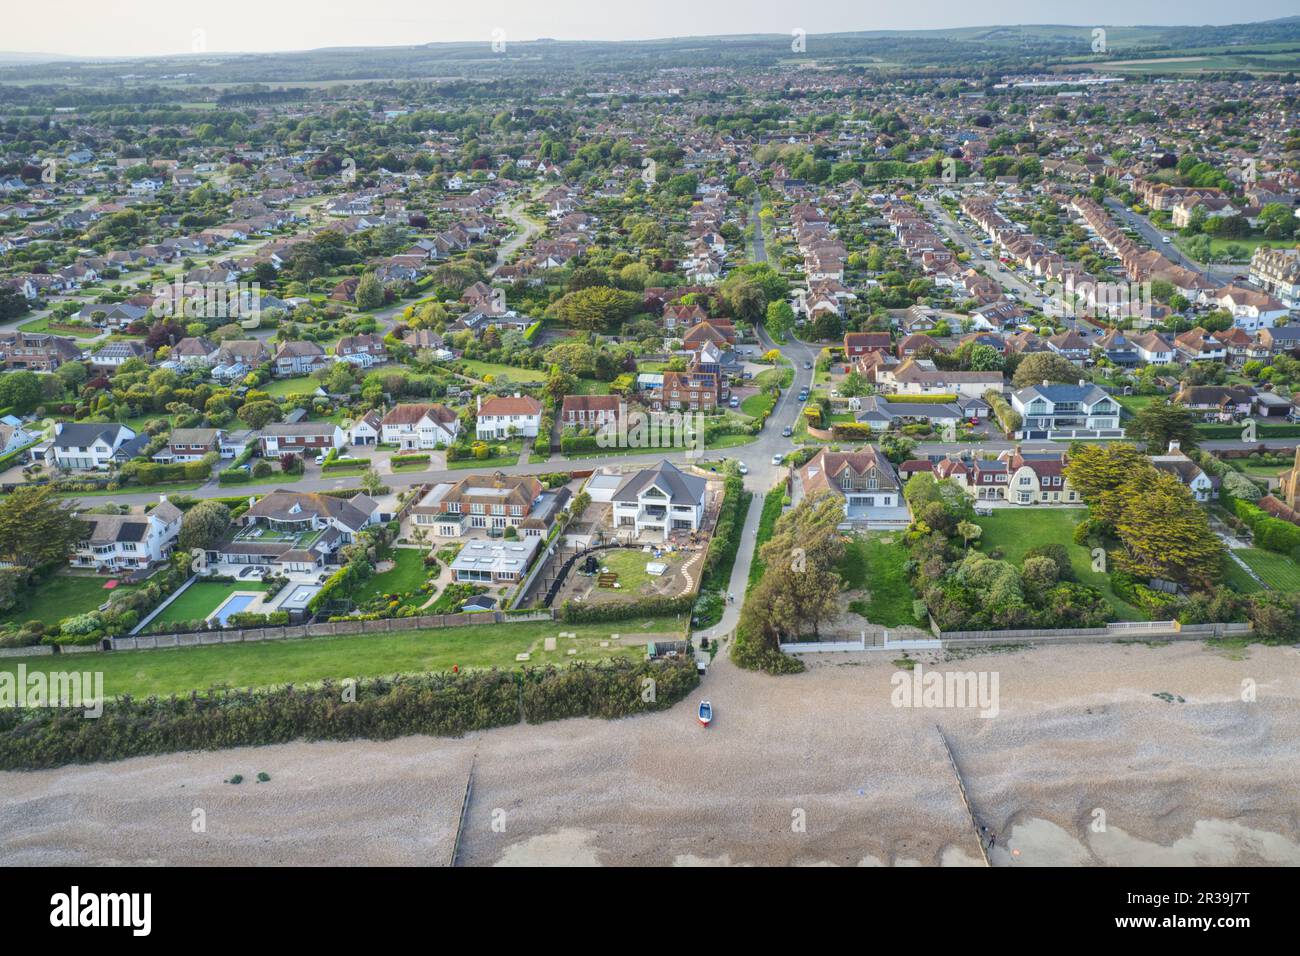 Aerial view over the West Sussex village of East Preston on the Southern Coast of England from the sea towards sea lane. Stock Photo